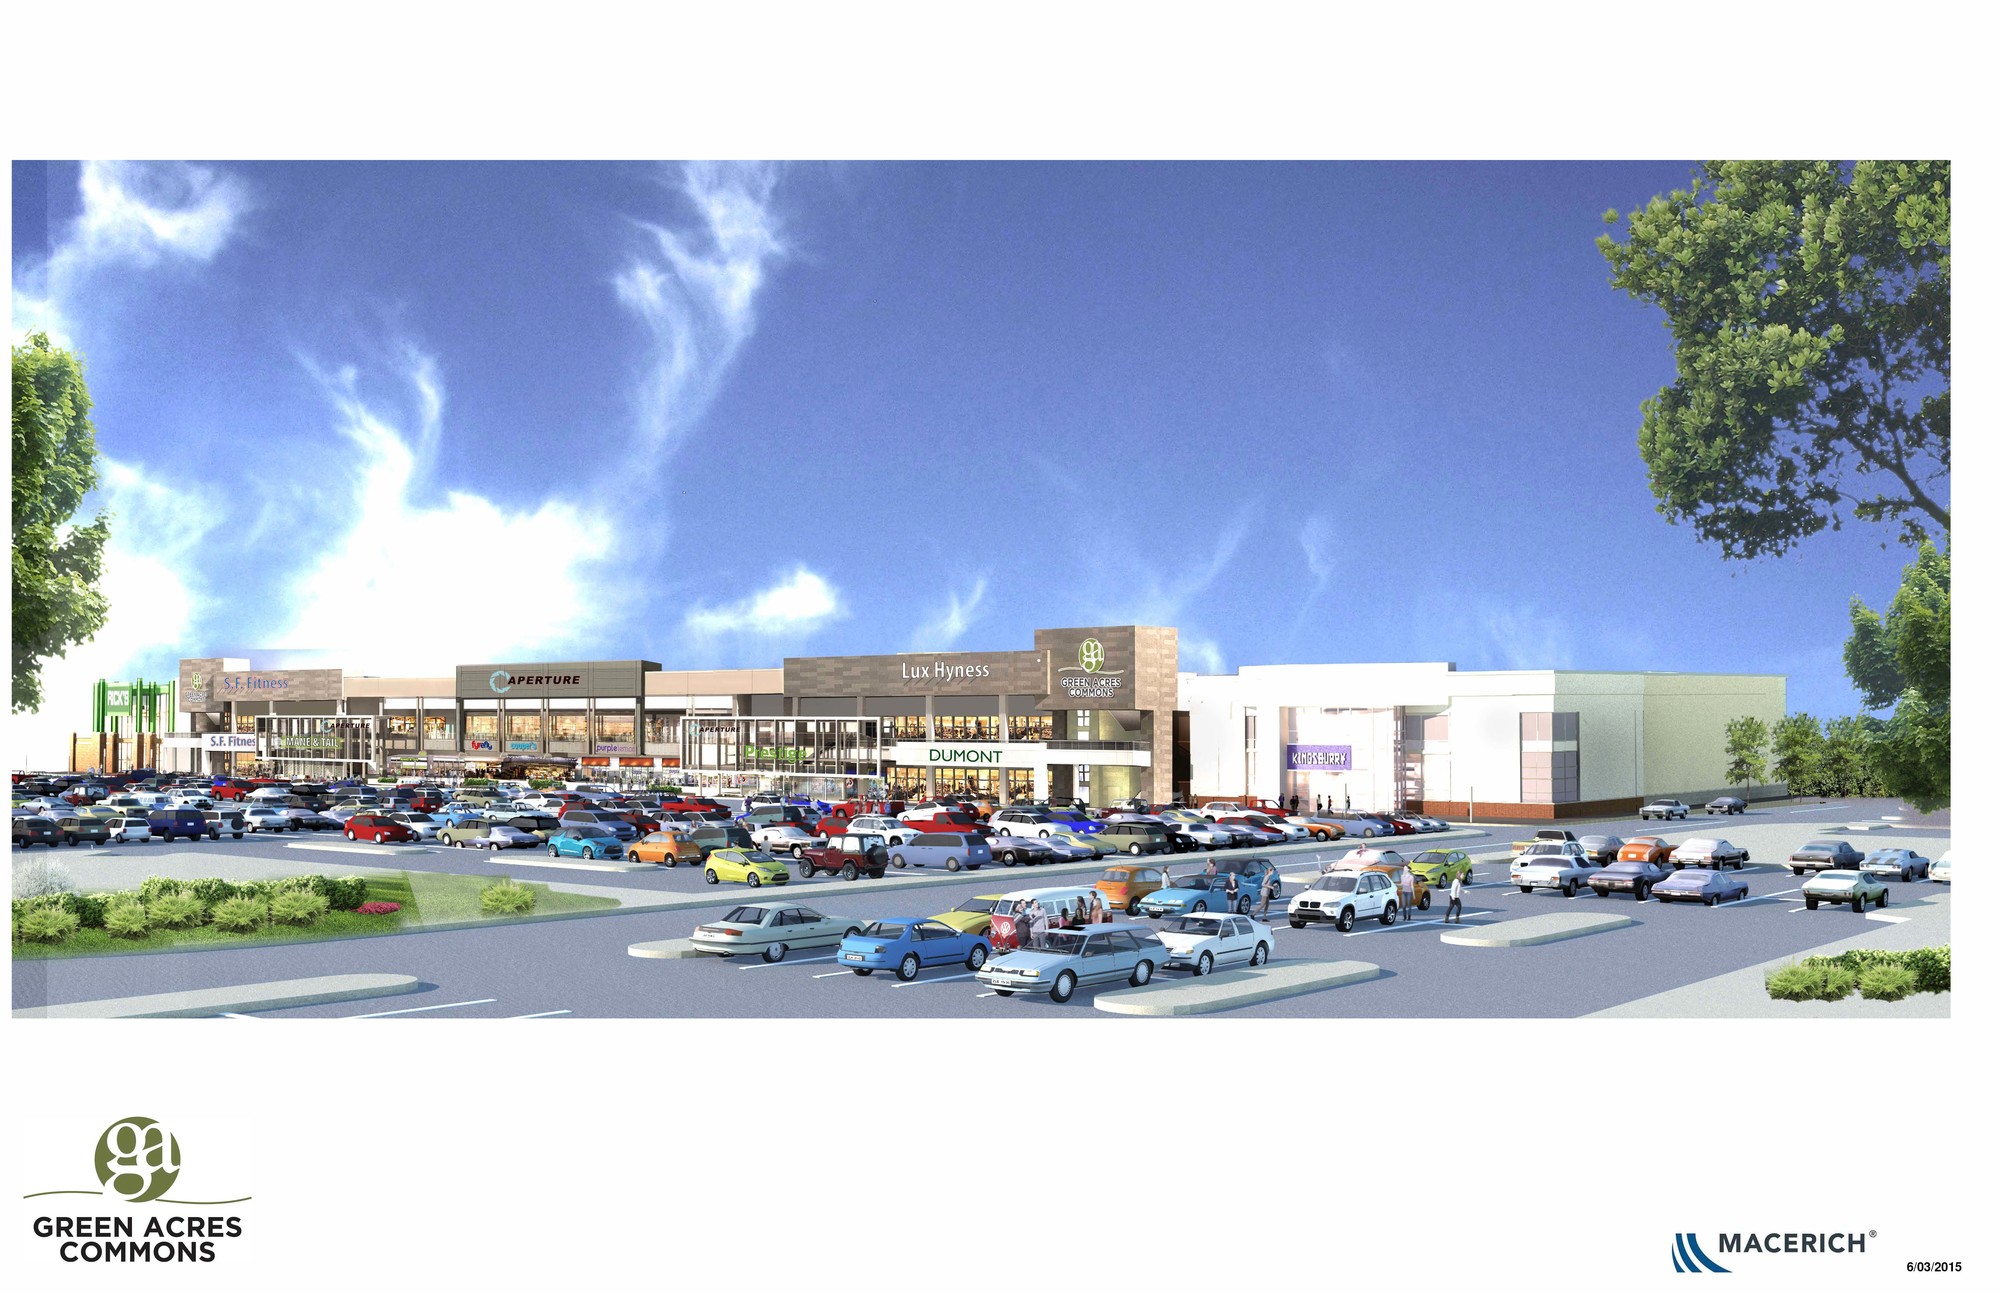 The Green Acres Commons shopping center will be built on 20 acres next to the Green Acres Mall. It is expected to open in fall 2016.